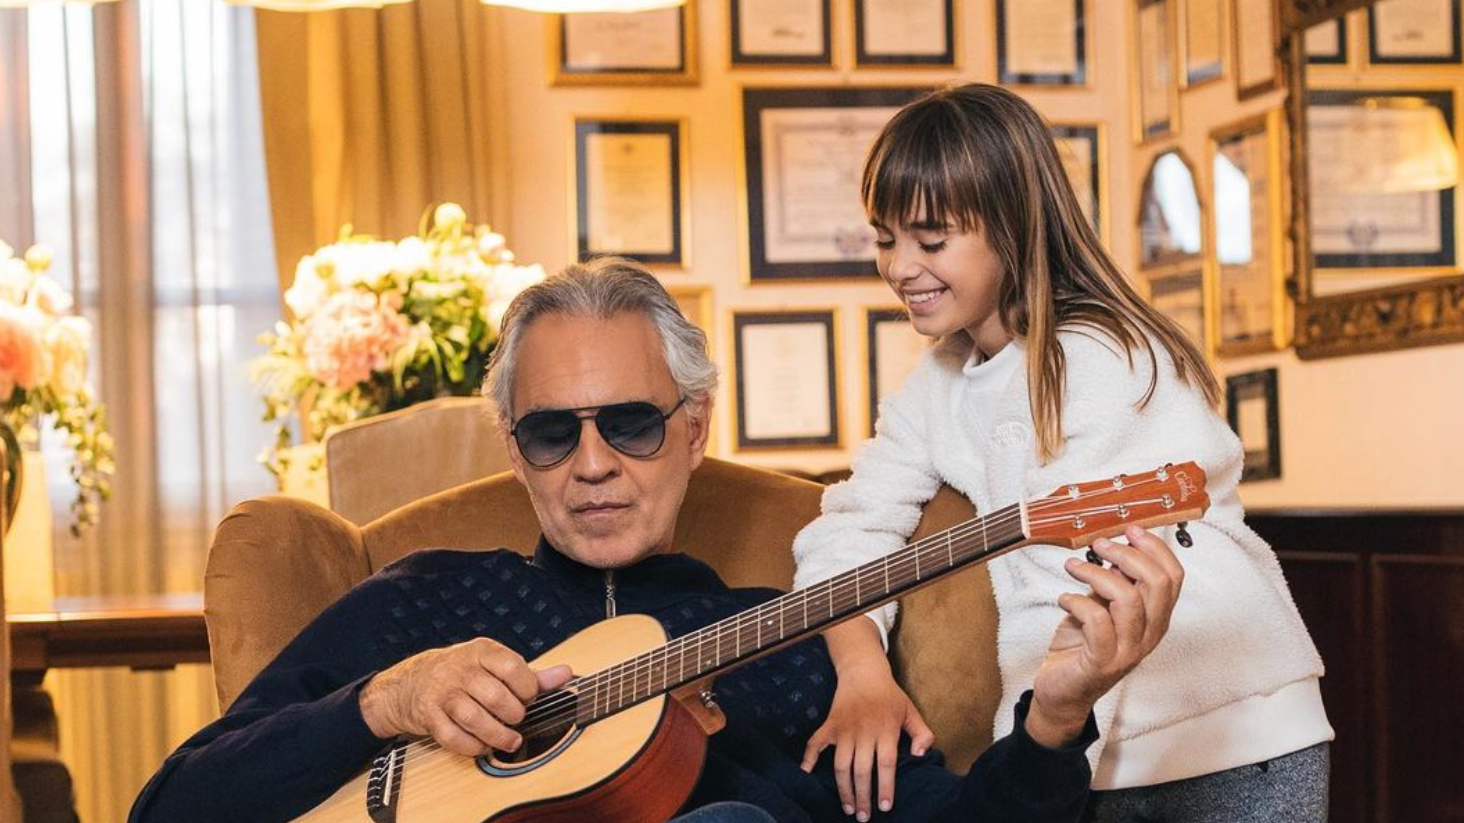 How Andrea Bocelli Is Bringing A Very Family Christmas To The